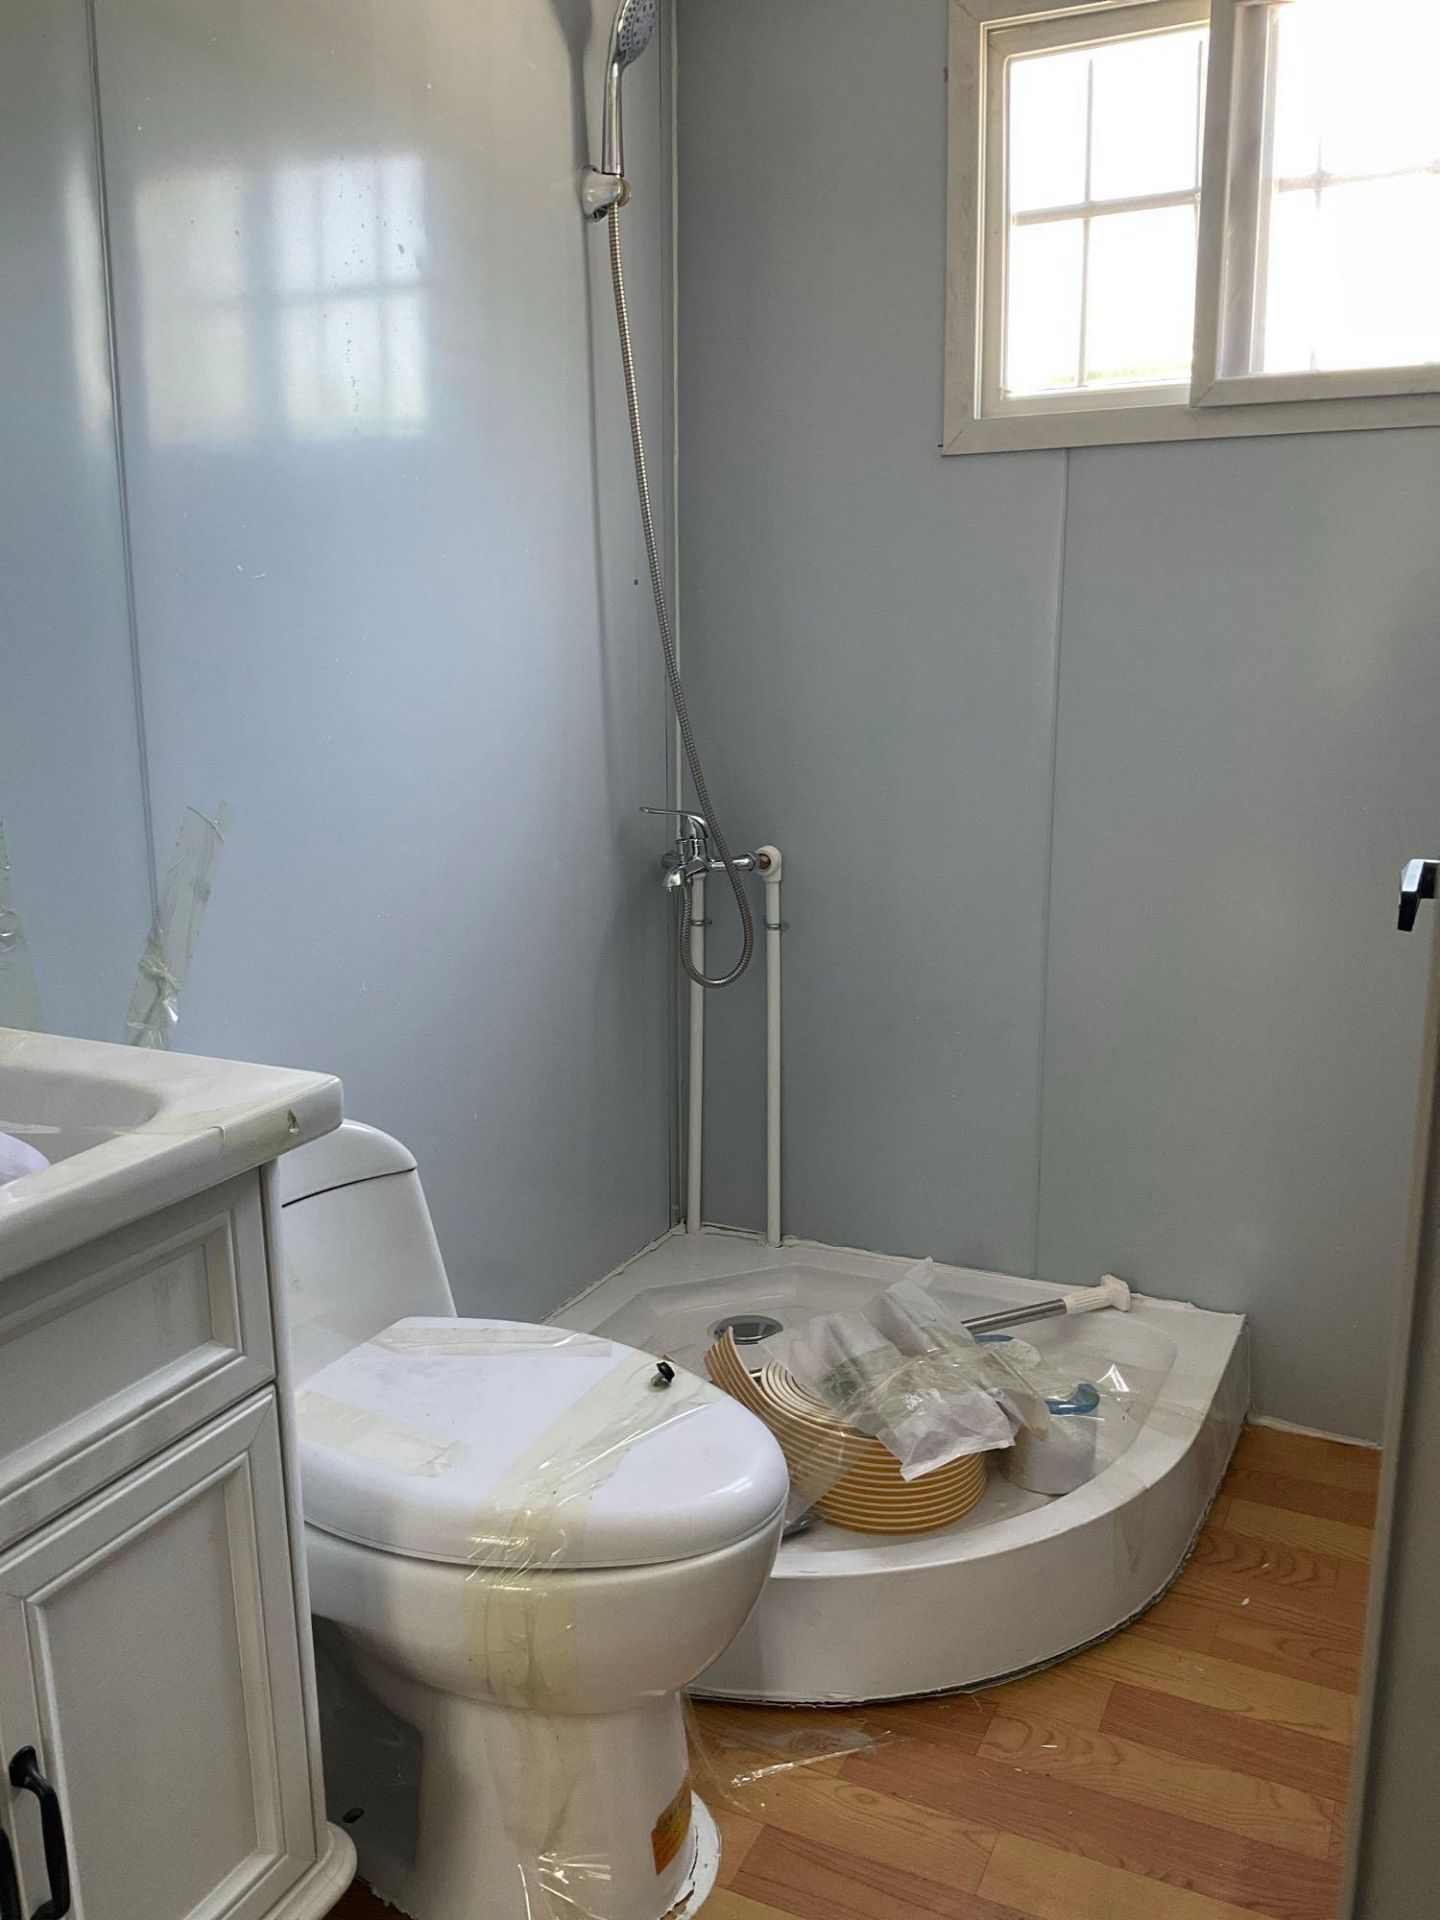 UNUSED EXPANDABLE HOUSE  SHOWER ROOM, TOILET,  PLUMBING AND ELECTRIC HOOK UP, 110V,  LIGHTING , A... - Image 18 of 21